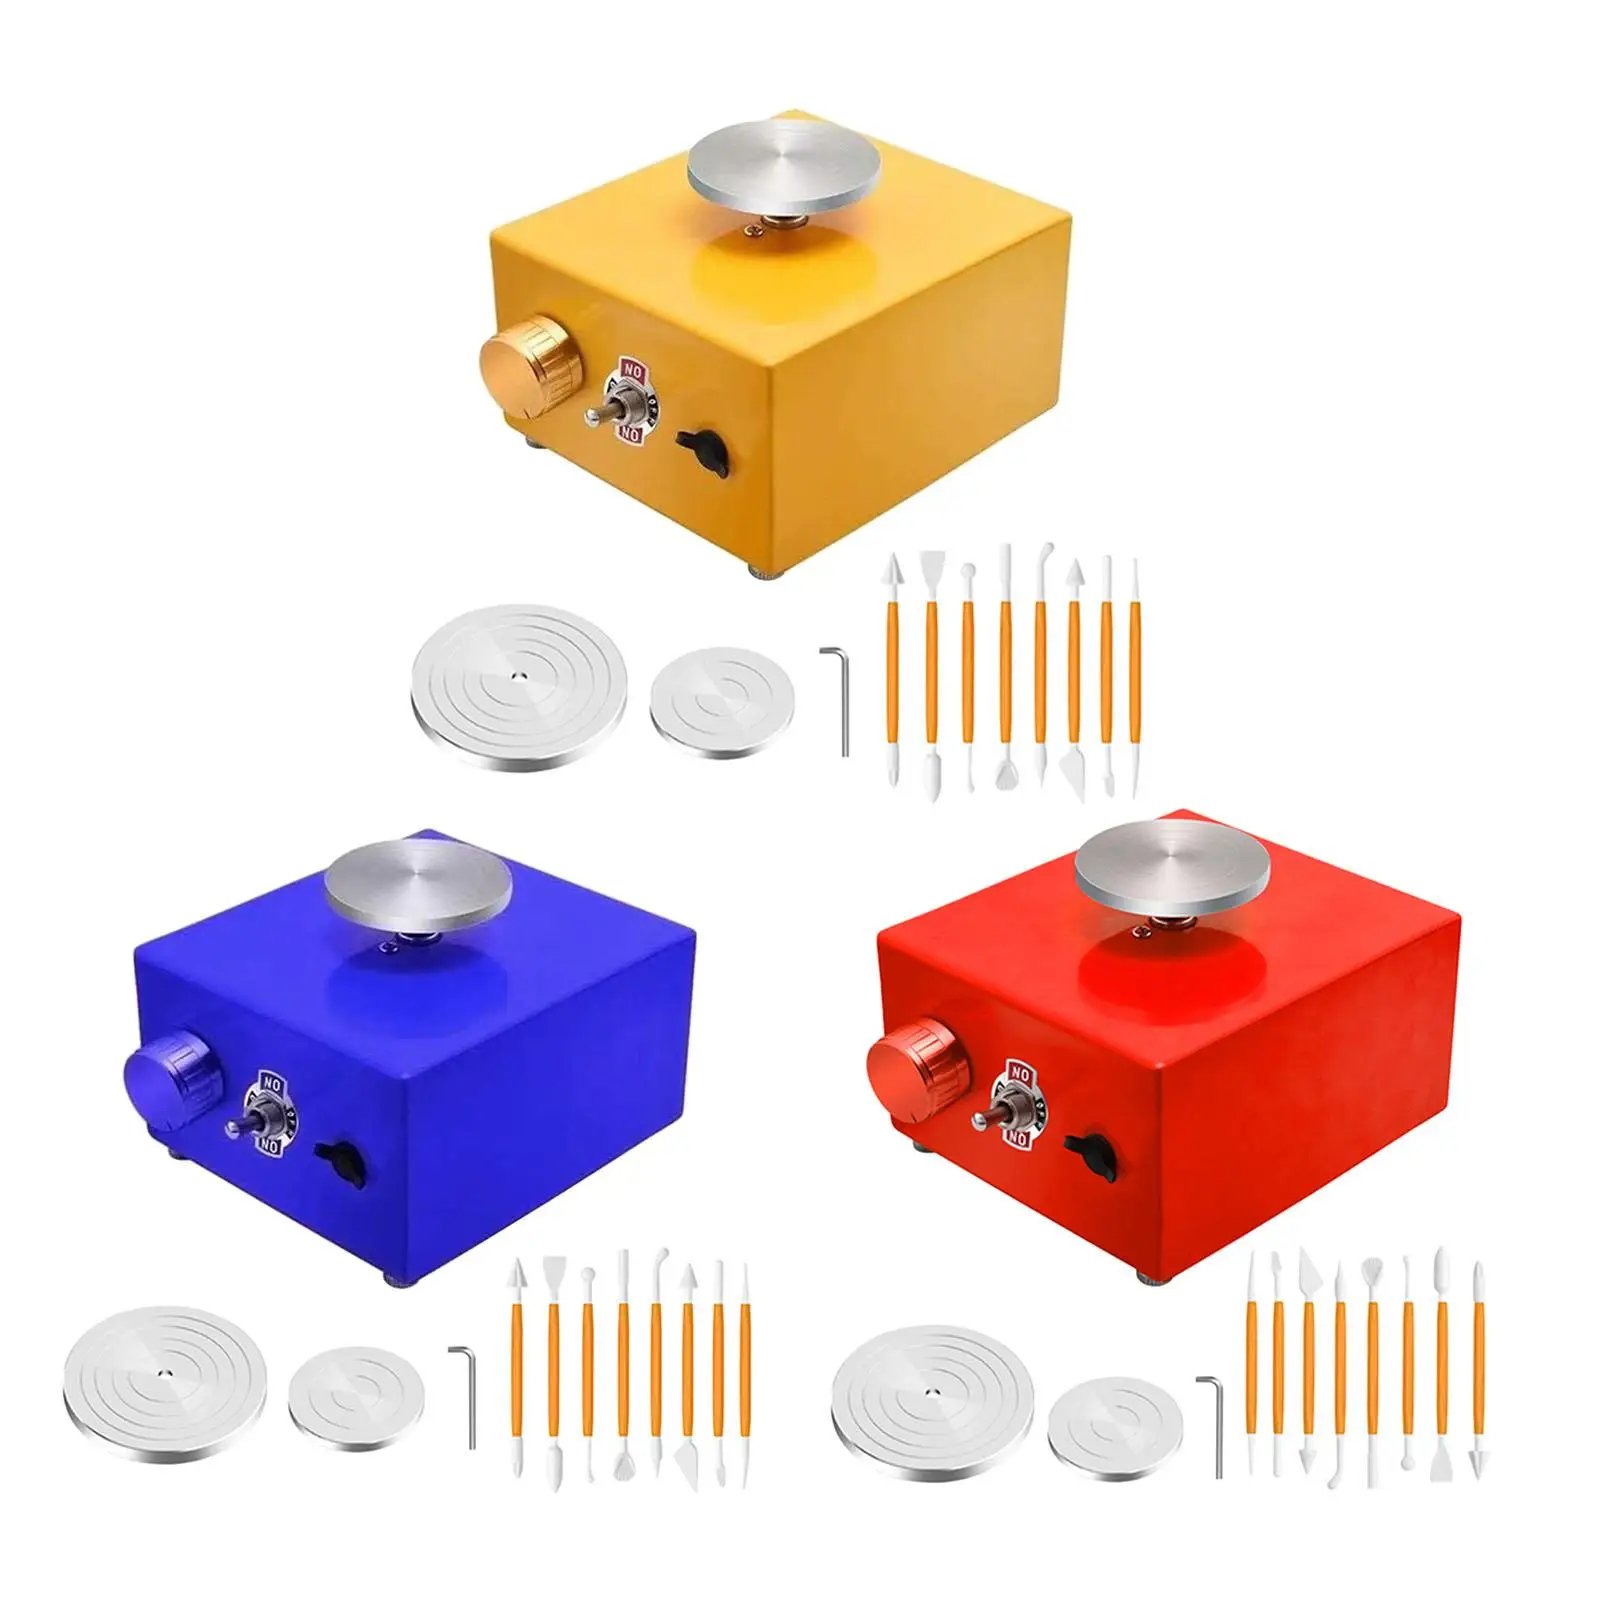 Mini Electric Pottery Wheel Machine for Ceramic Work Art Craft Turntable Rotary Plate DIY Clay Tool Kids Teaching Aids images - 6